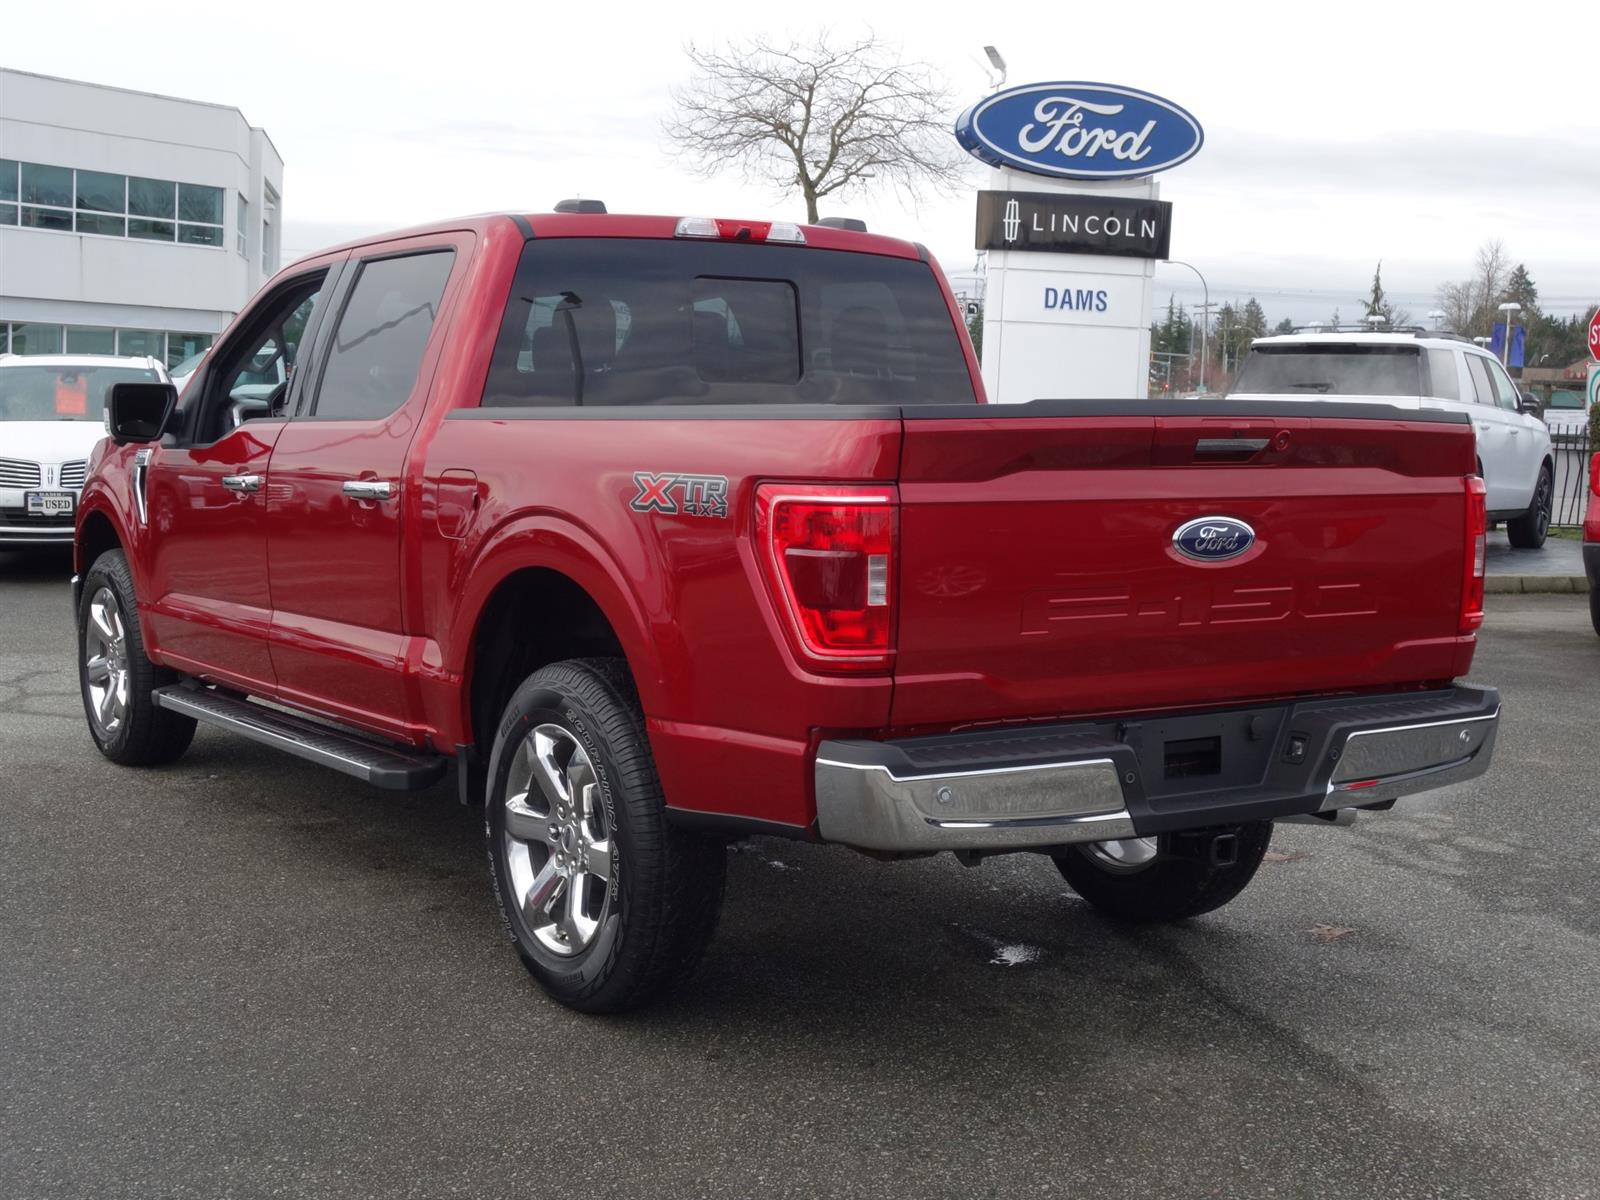 2021 Ford F-150 XLT Rapid Red, 5.0L V8 with Auto Start-Stop Technology